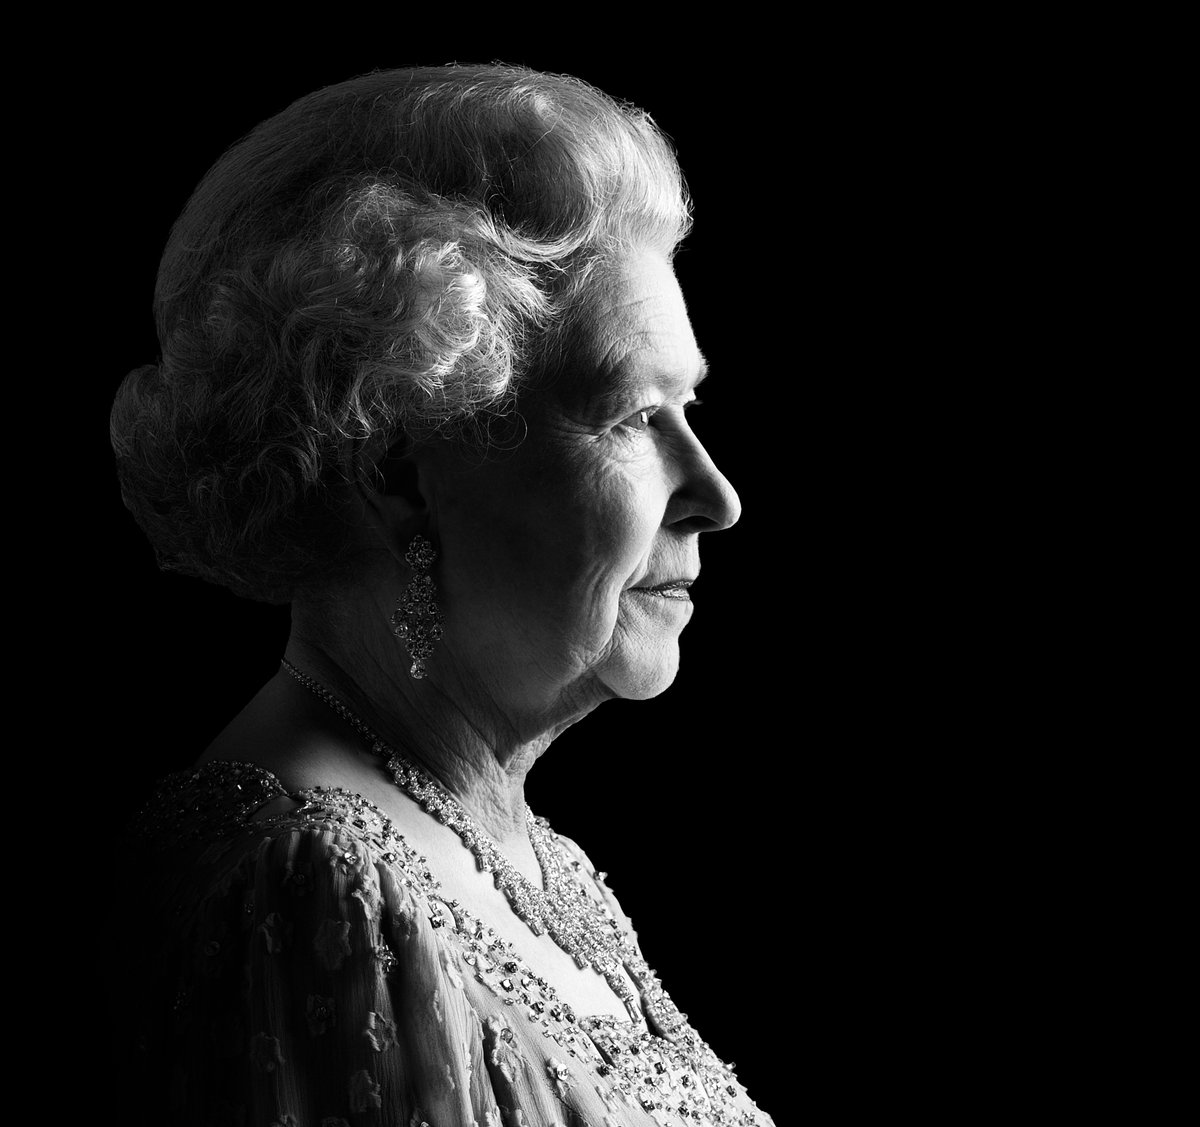 Today, on the solemn anniversary of the passing of Her Late Majesty Queen Elizabeth II, our thoughts are with His Majesty King Charles III and the whole Royal Family. With the perspective of a year, the scale of Her Late Majesty's service only seems greater. Her devotion to the…